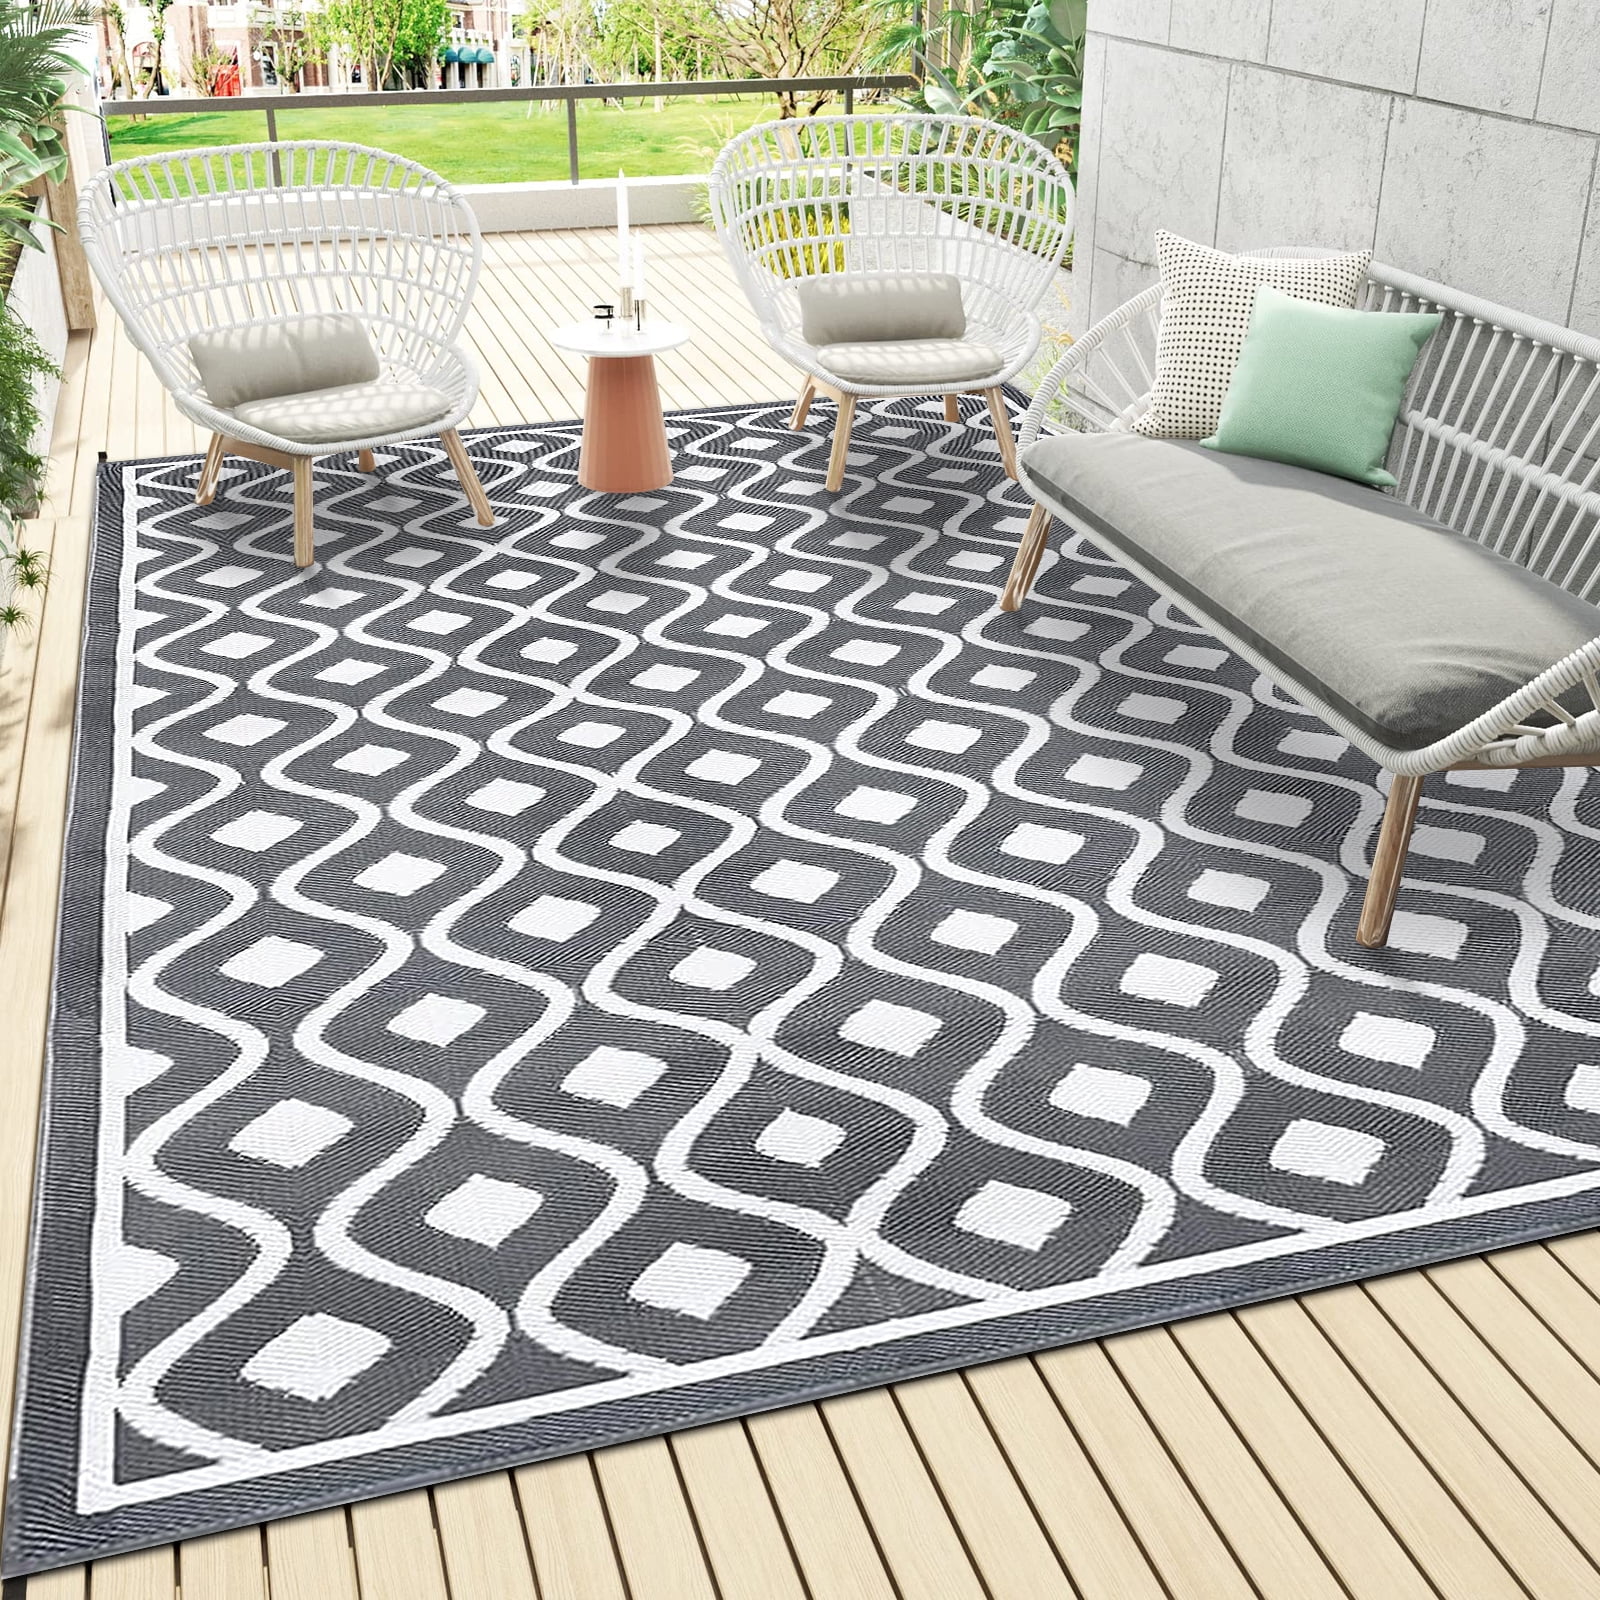 GENIMO Outdoor Rug for Patio Clearance, 6'x9' Waterproof Reversible Outside  Carpet for Outdoor Decor, Area Boho Rug, Plastic Straw Mat for RV, Deck,  Patio, Camp…